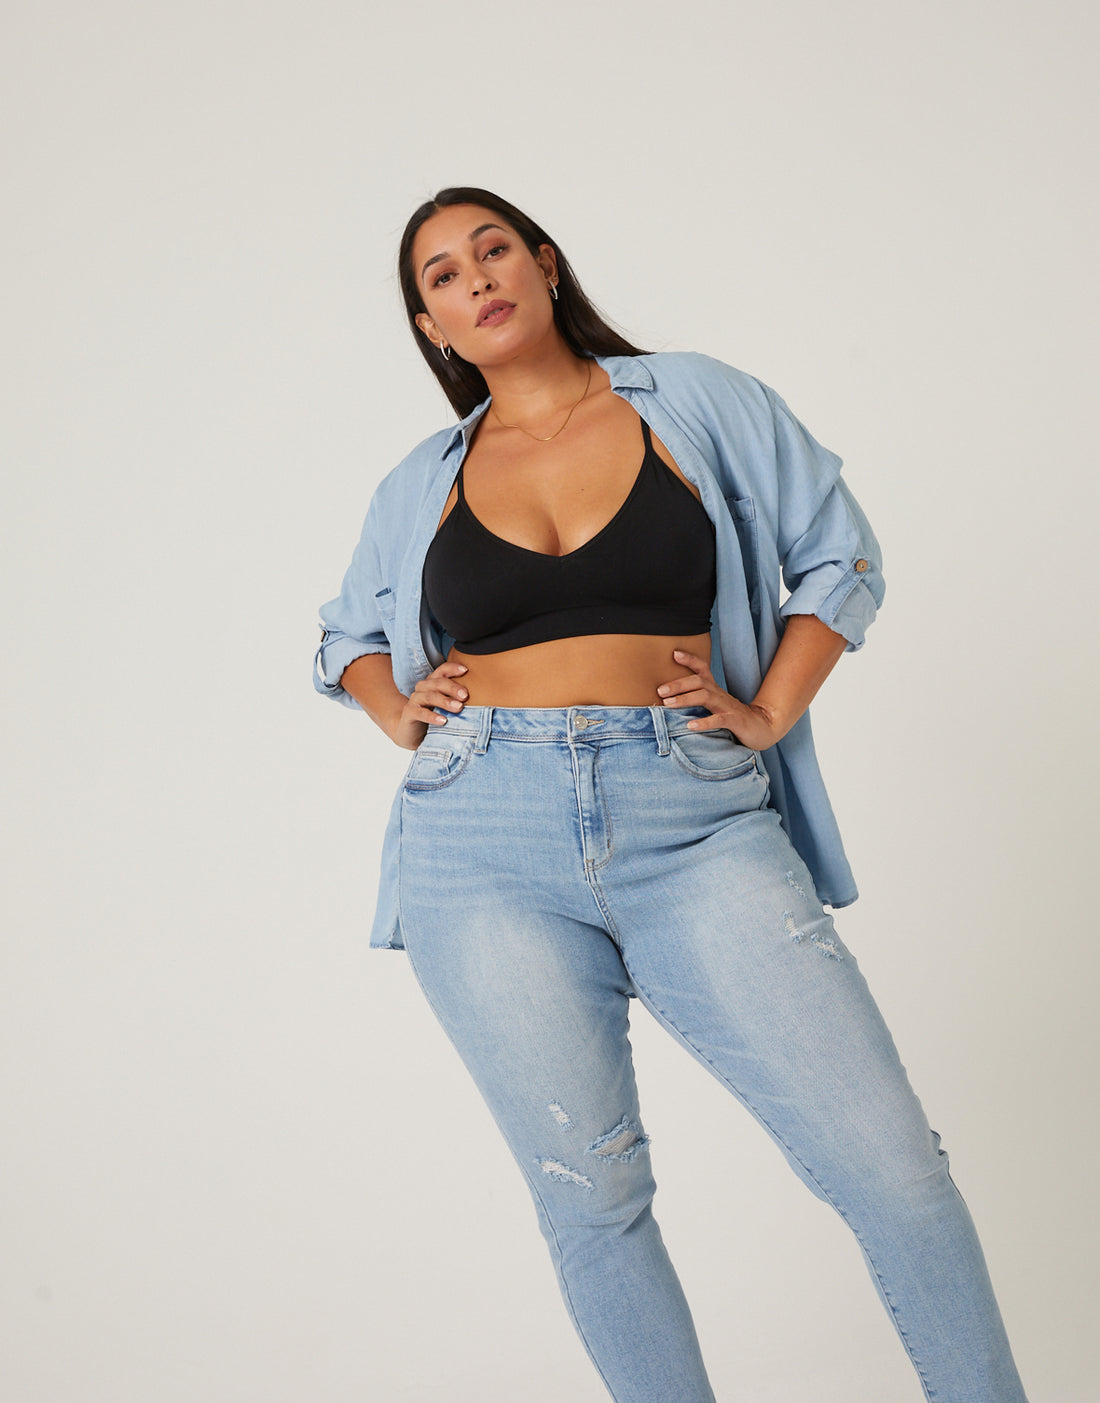 Curve Chambray Denim Shirt Plus Size Tops -2020AVE